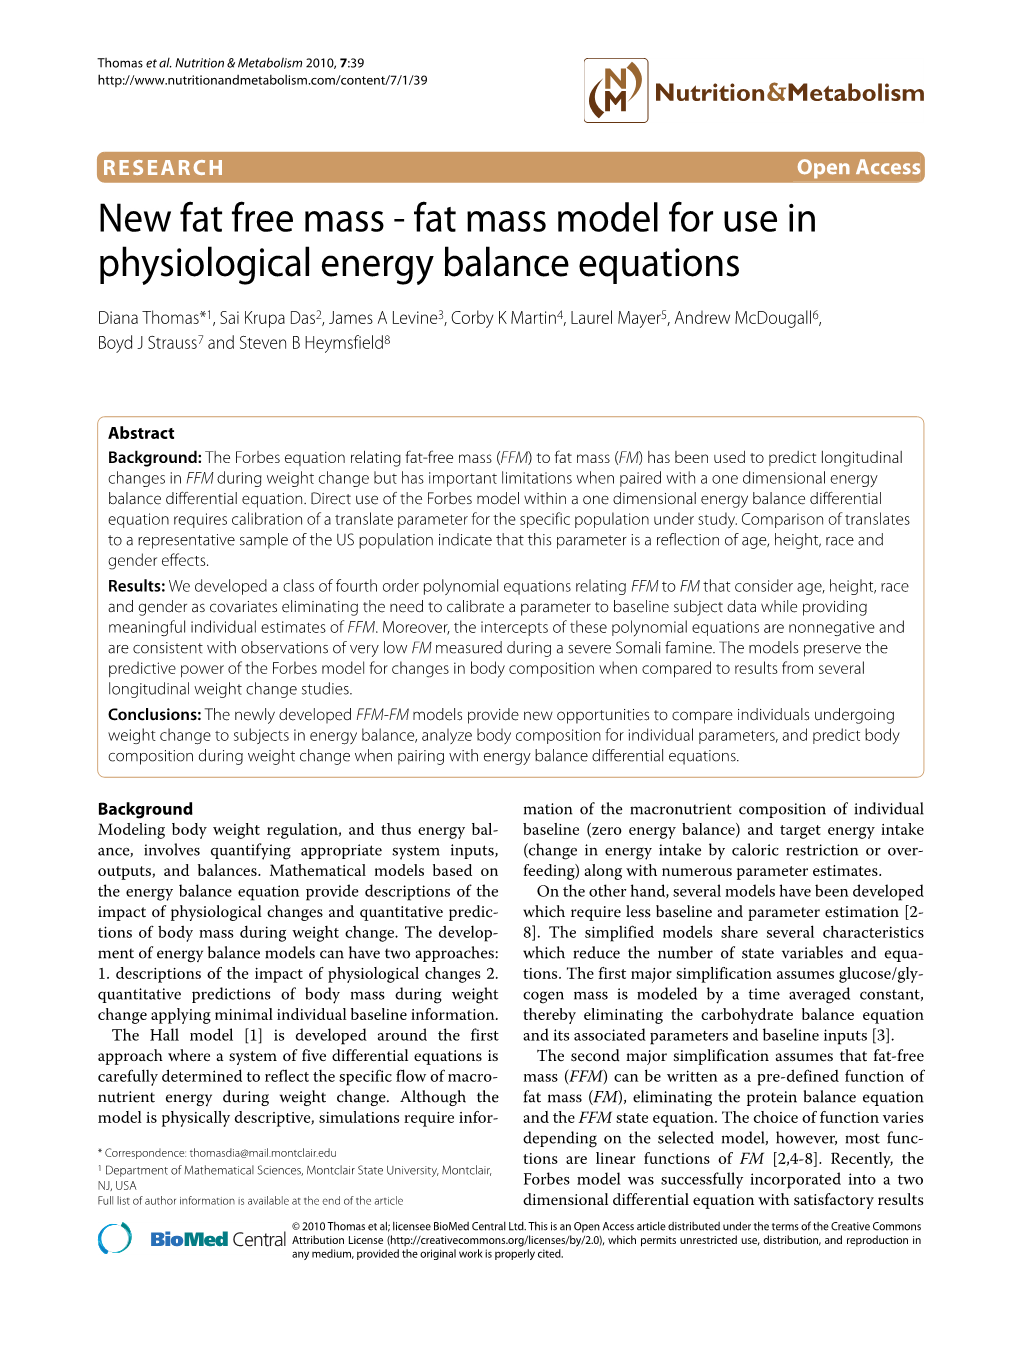 New Fat Free Mass - Fat Mass Model for Use in Physiological Energy Balance Equations Nutrition & Metabolism 2010, 7:39